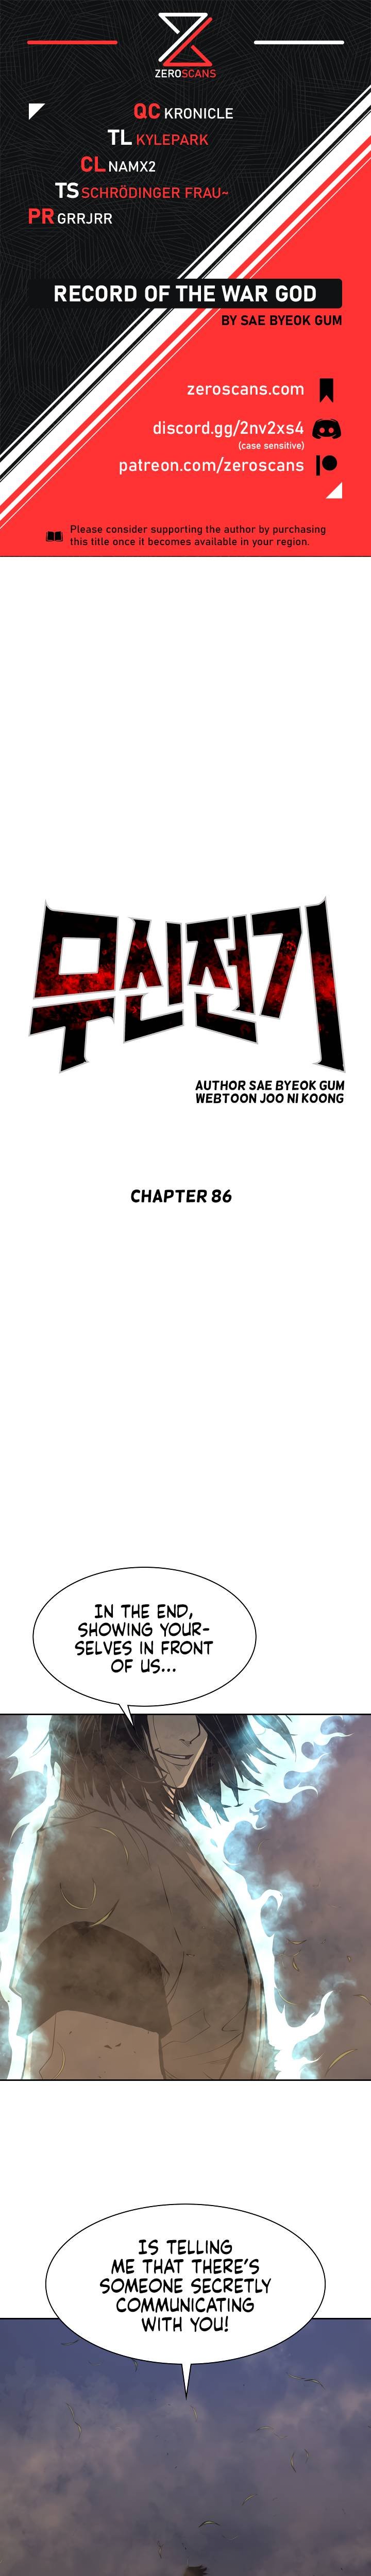 record-of-the-war-god-chap-86-0